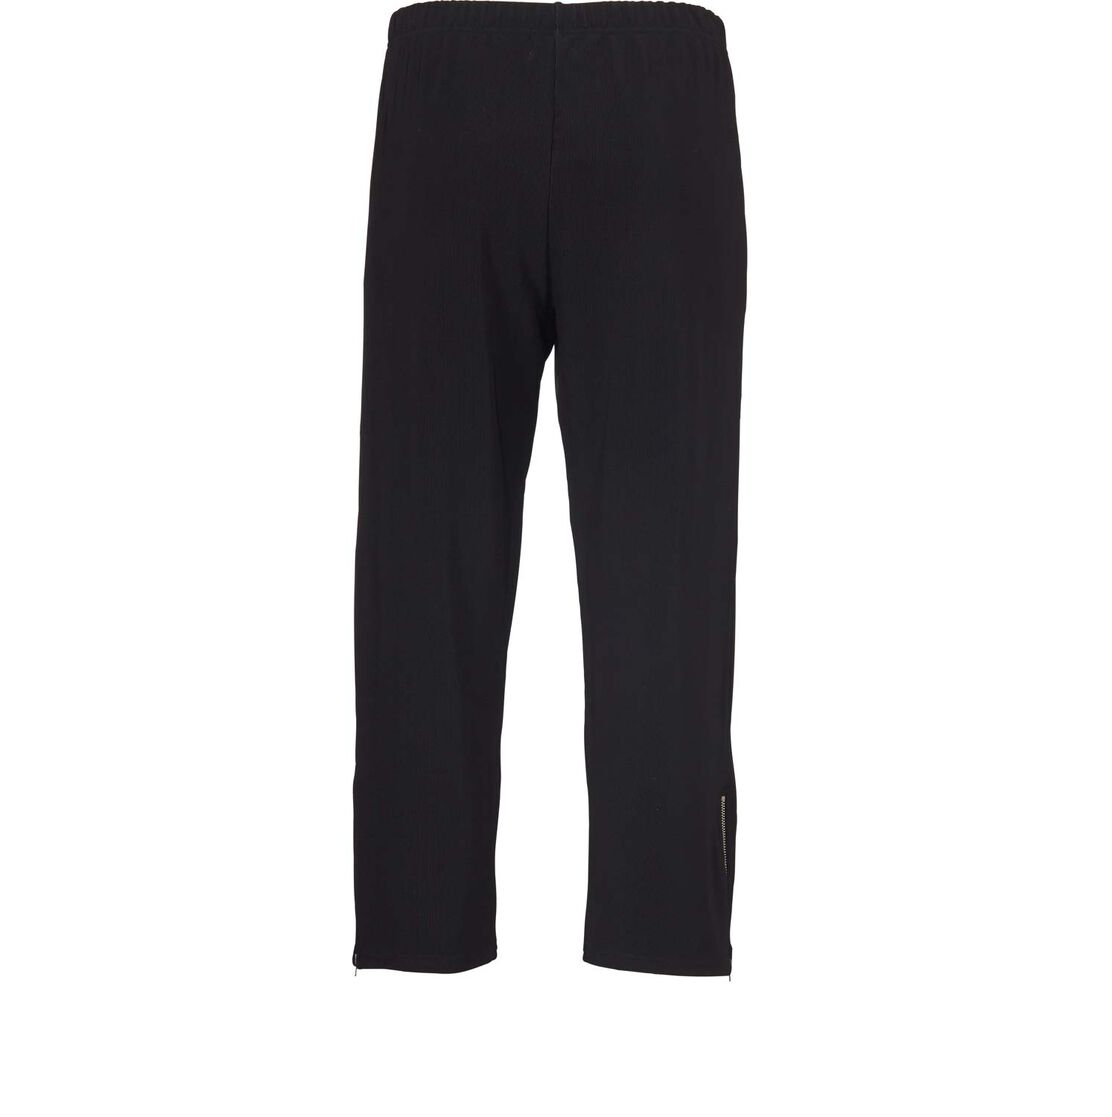 POLLY TROUSERS, Black, hi-res